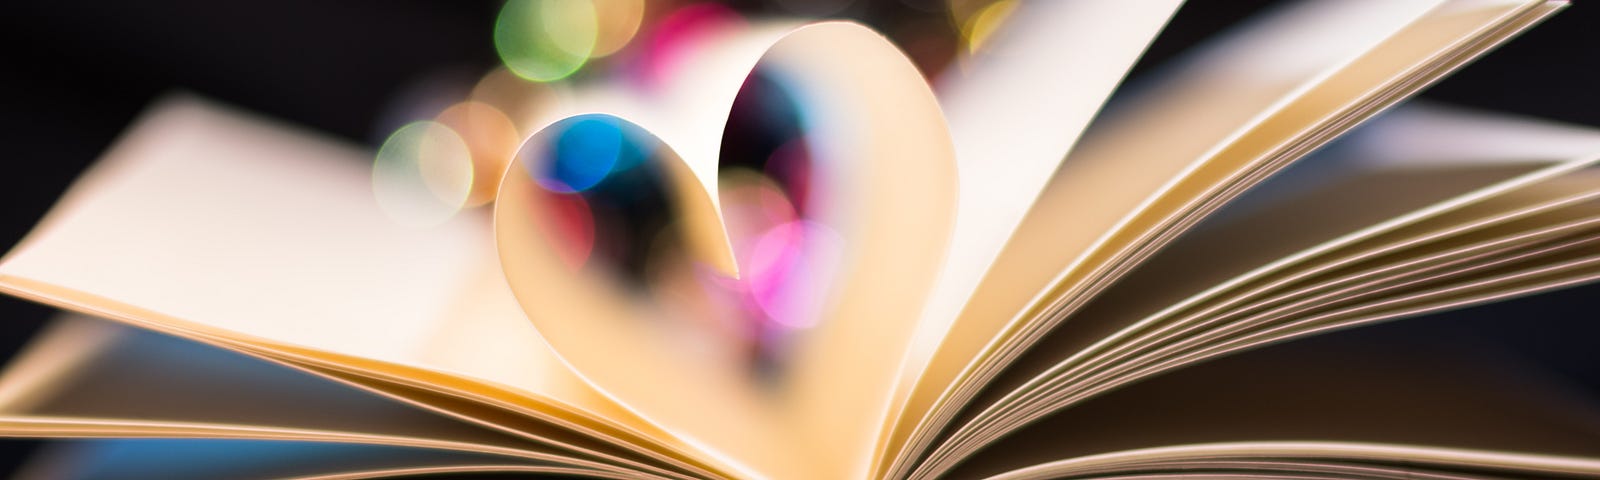 a paper book is open on desk with two pages folded together into spine to create a heart shape